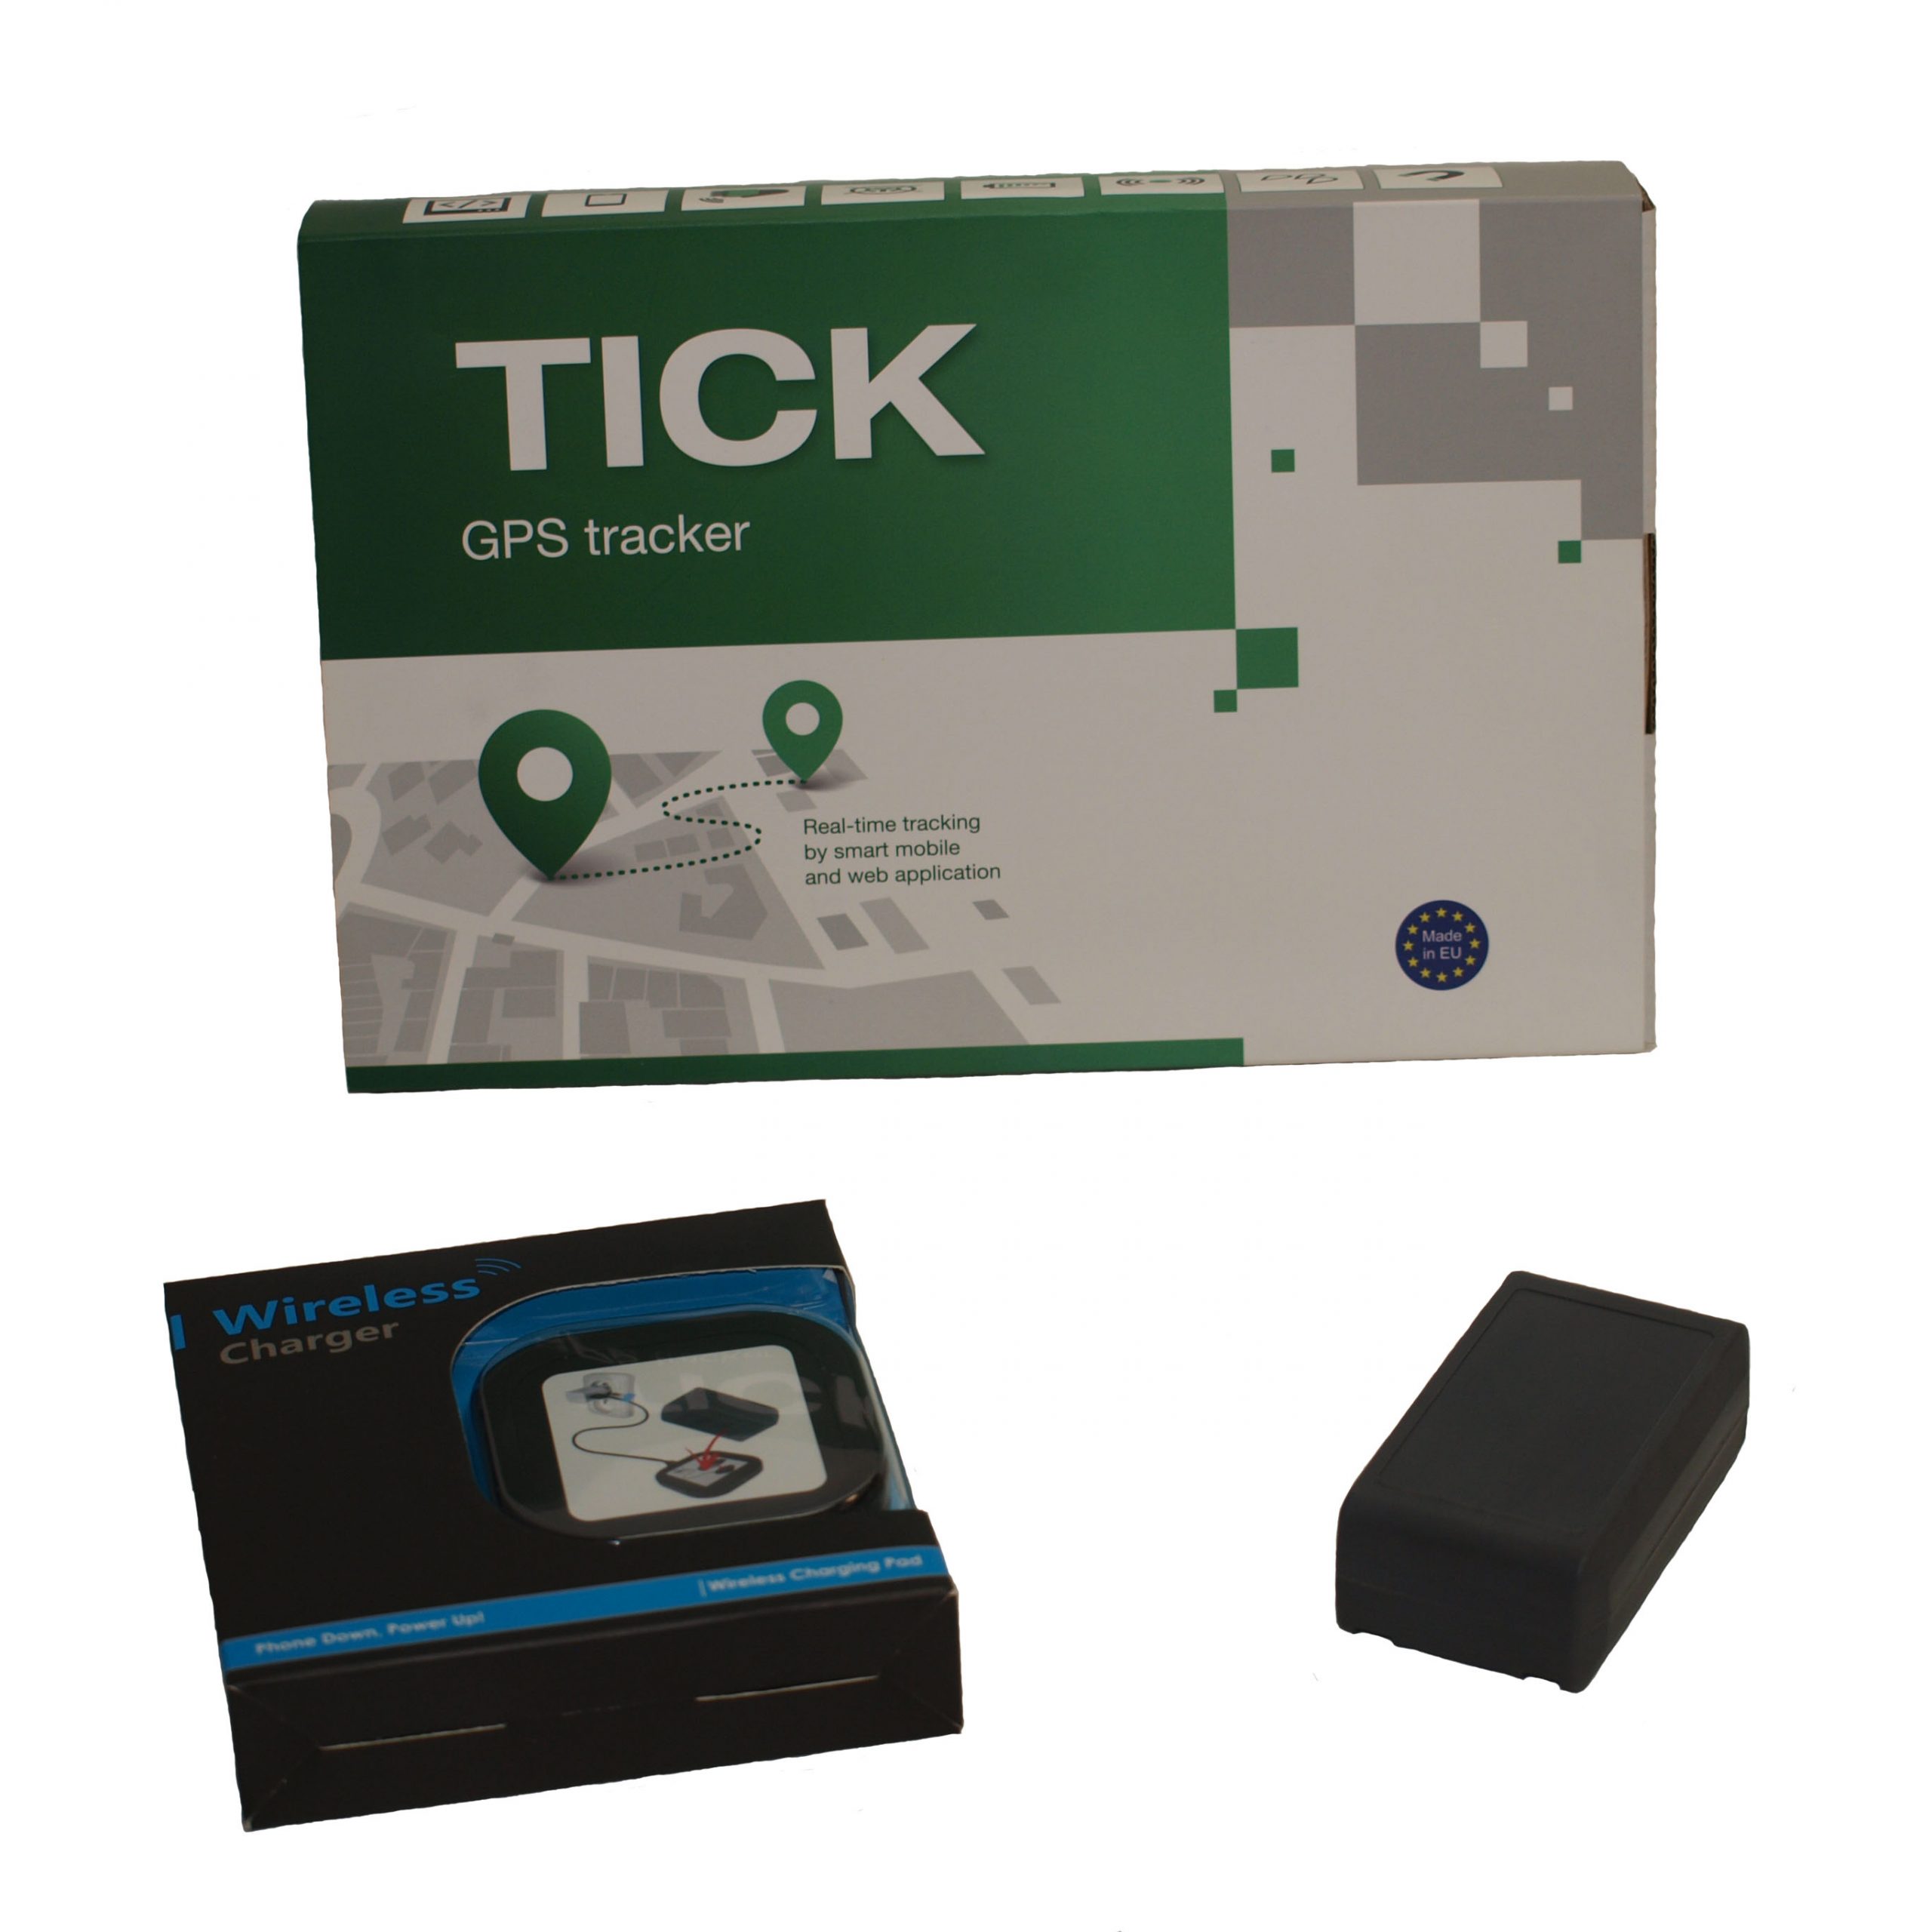 Product image of a Tick Tracker